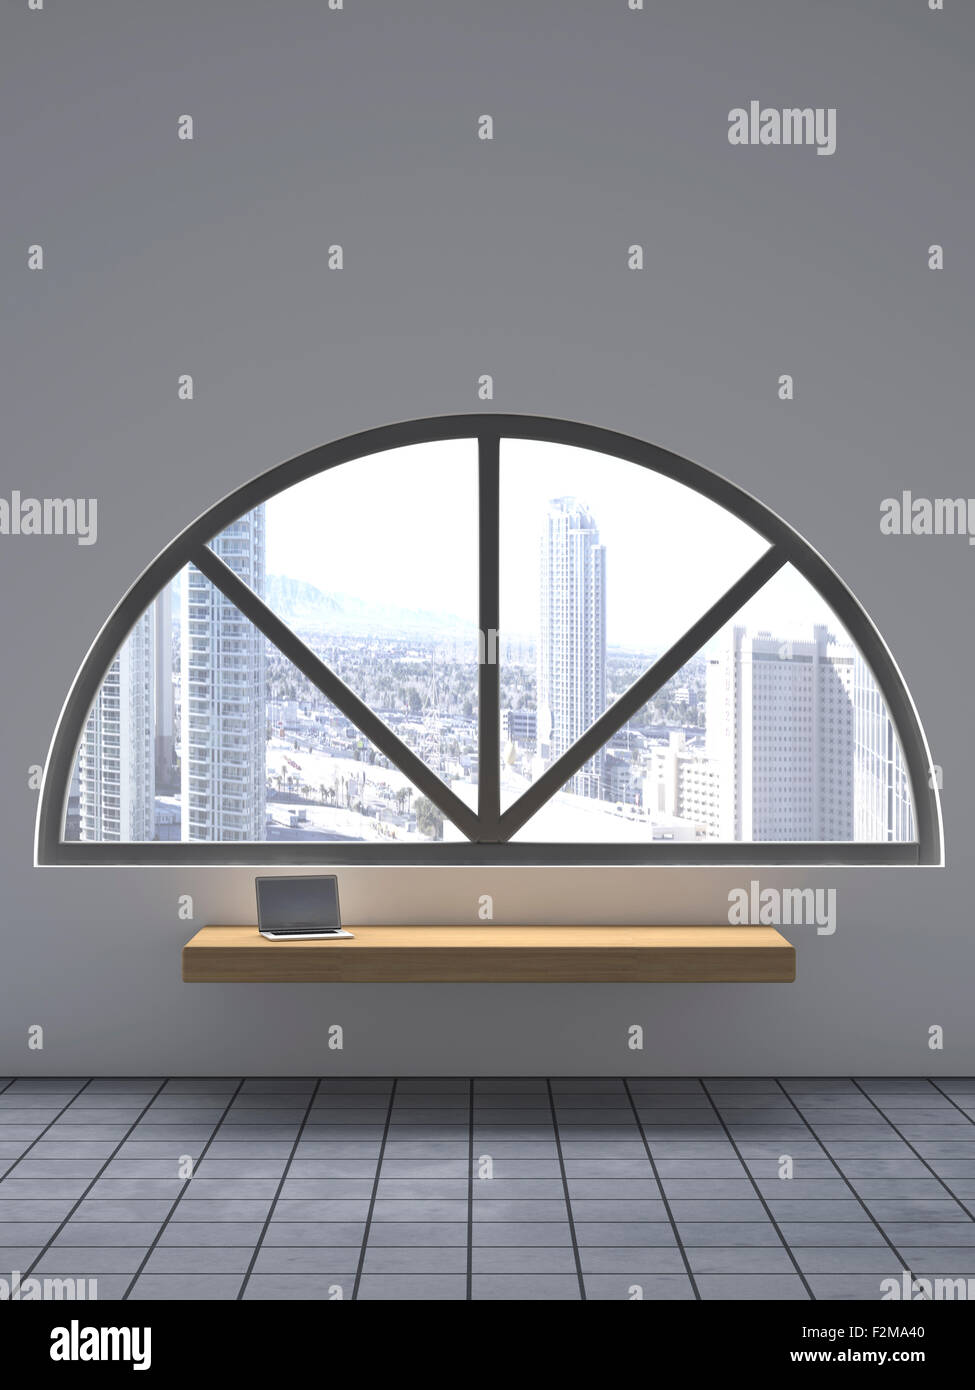 Laptop on wooden bench under a round arch window, 3D Rendering Stock Photo